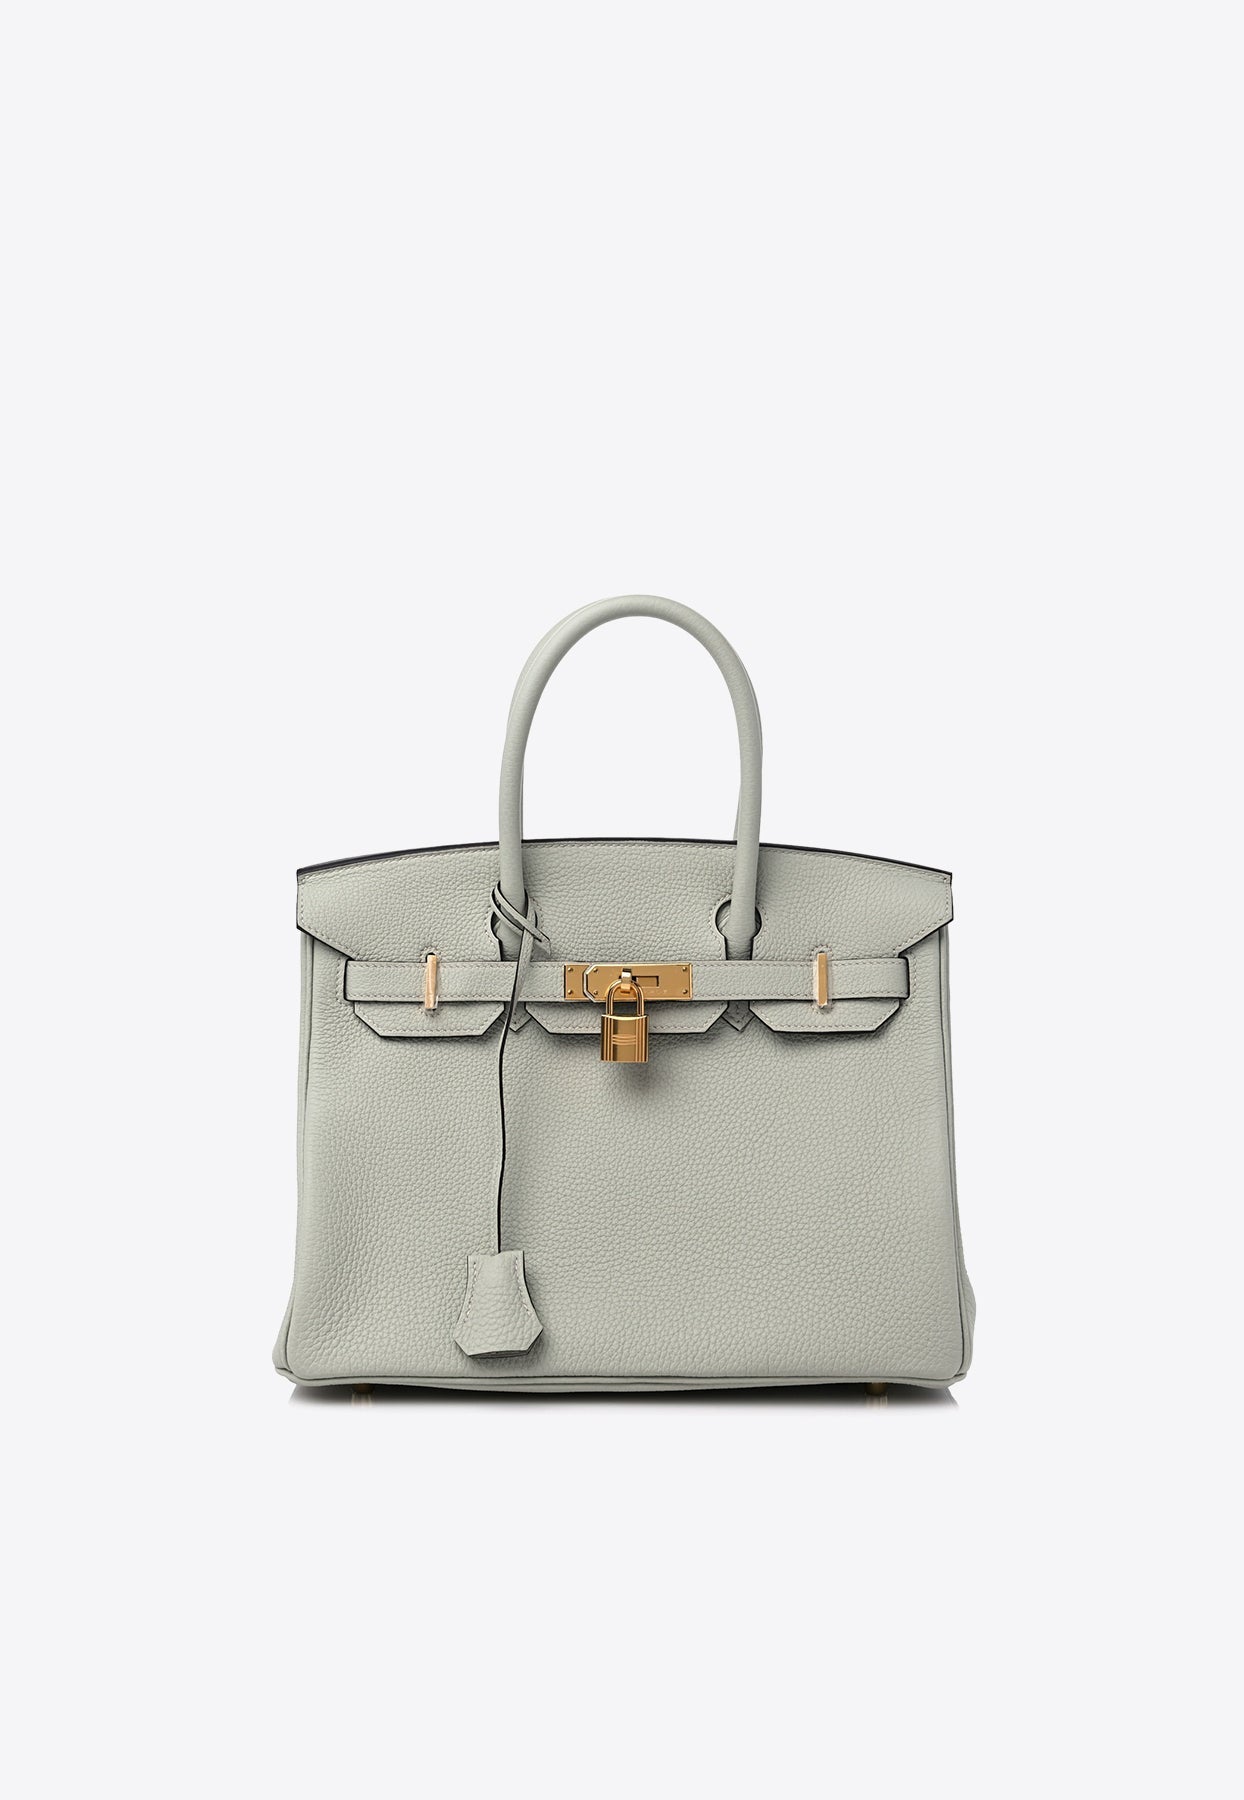 Hermes Birkin 30 in Gris Neve Togo Leather with Gold Hardware